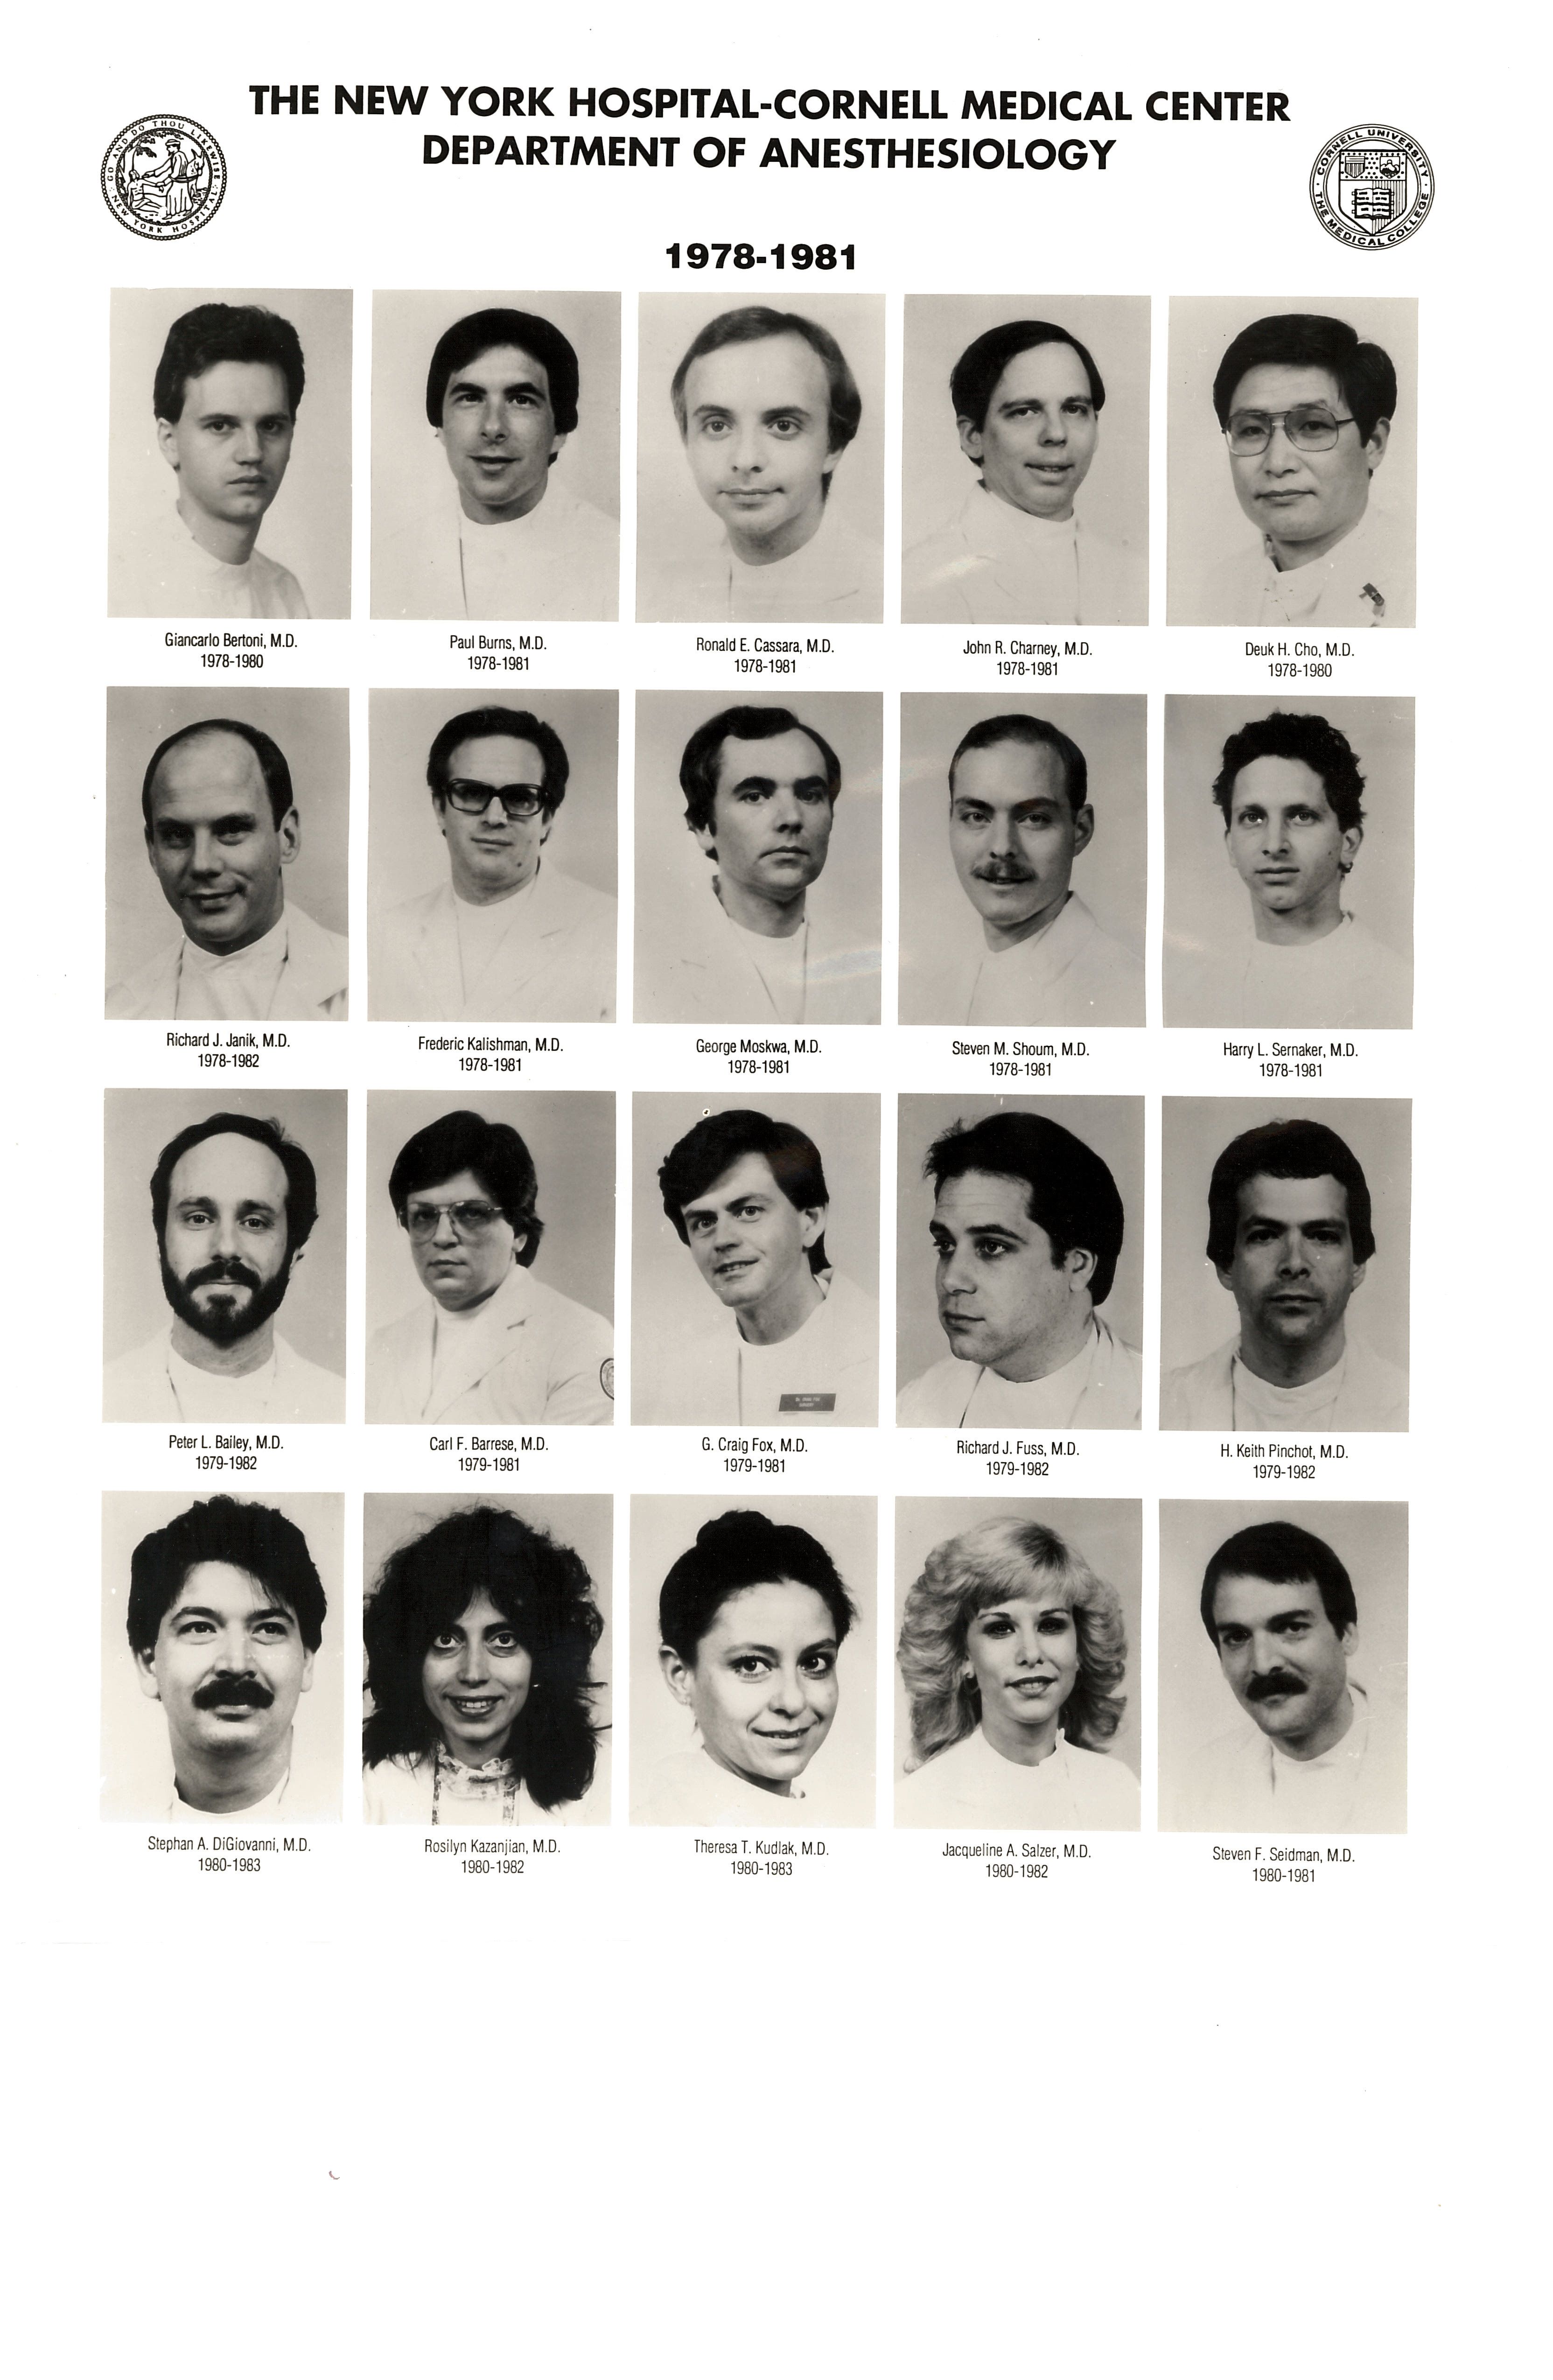 Department of Anesthesiology 1978-1981 